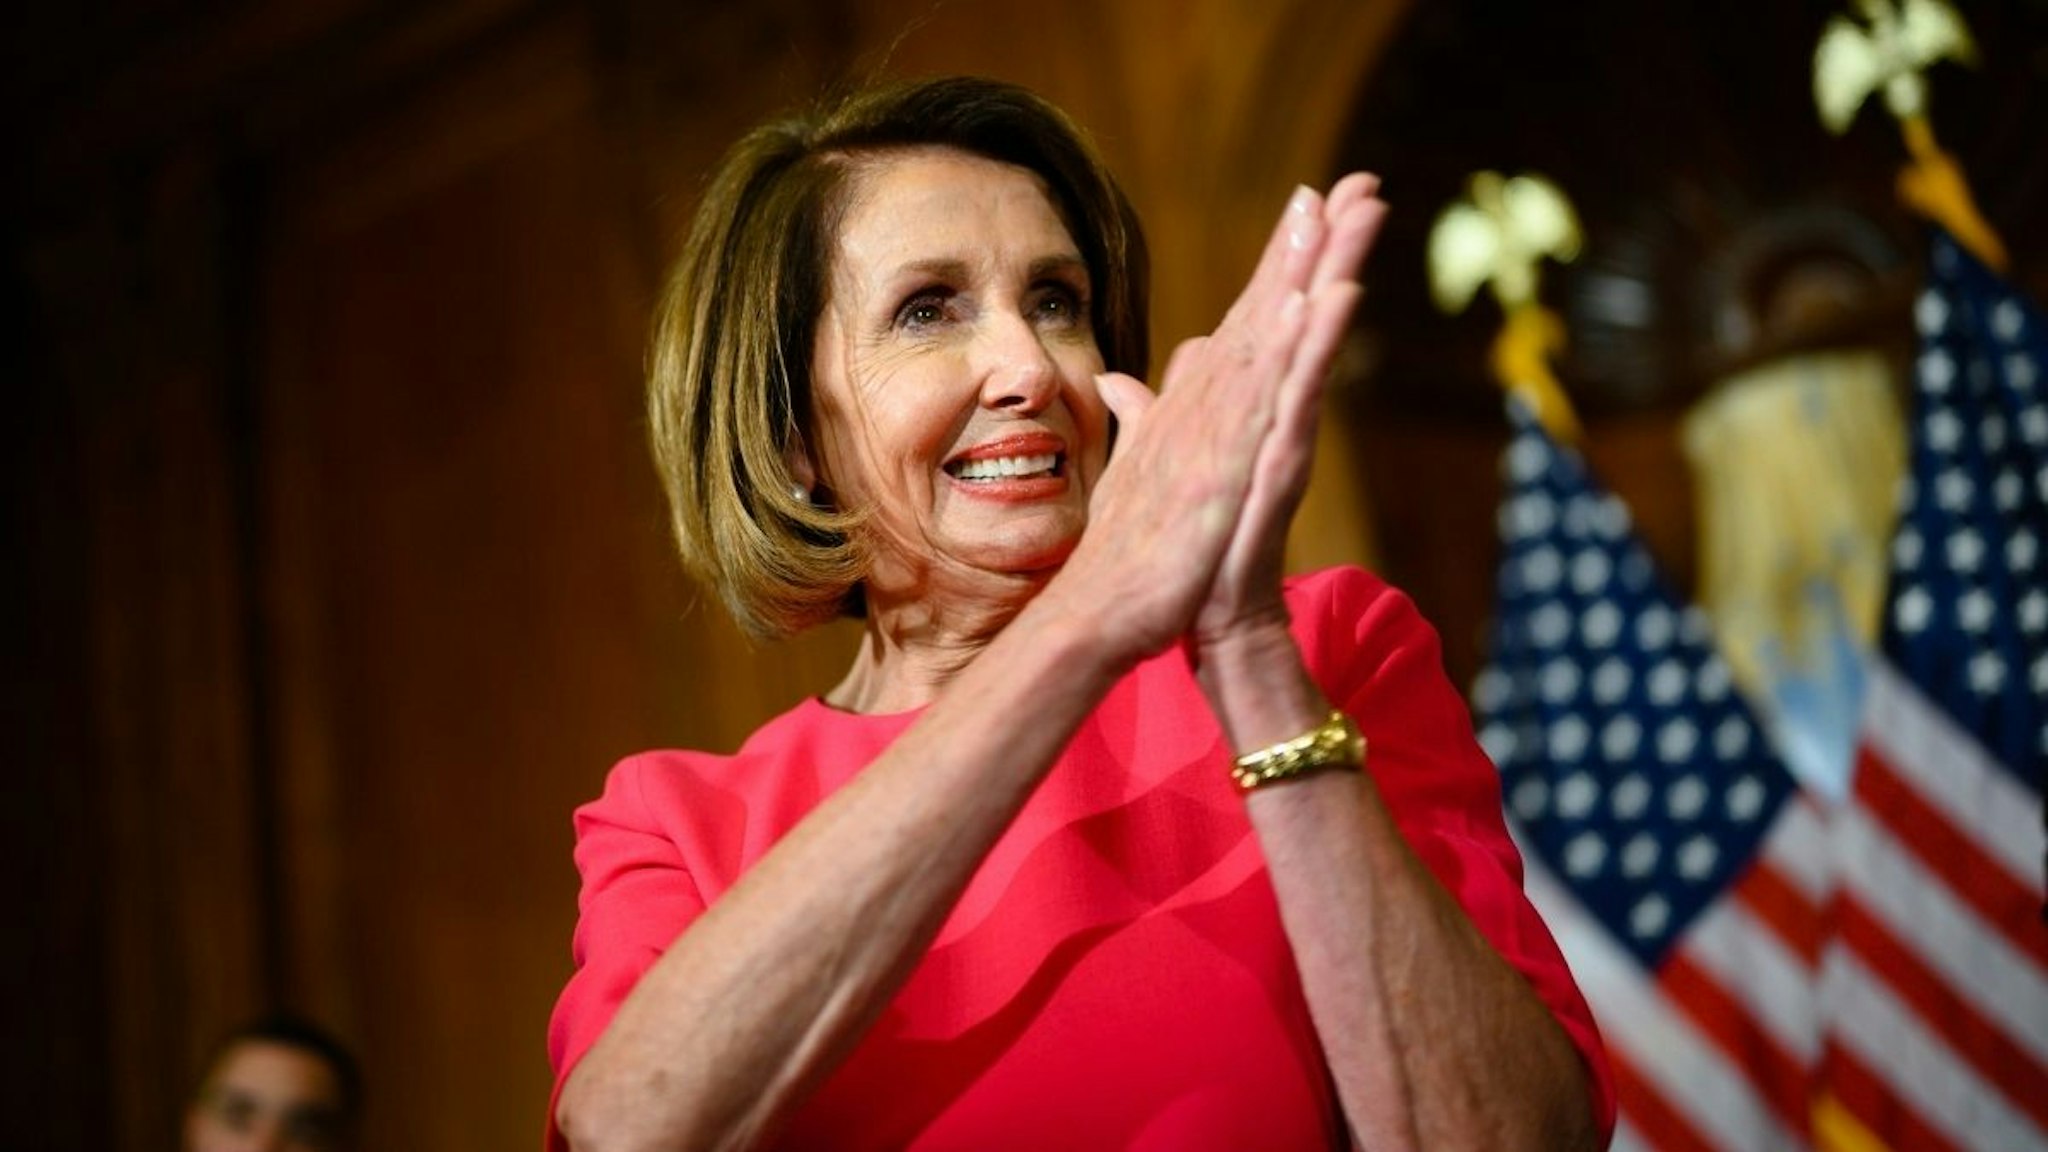 House Speaker Nancy Pelosi of California applauds all the staffers at the end of the event.